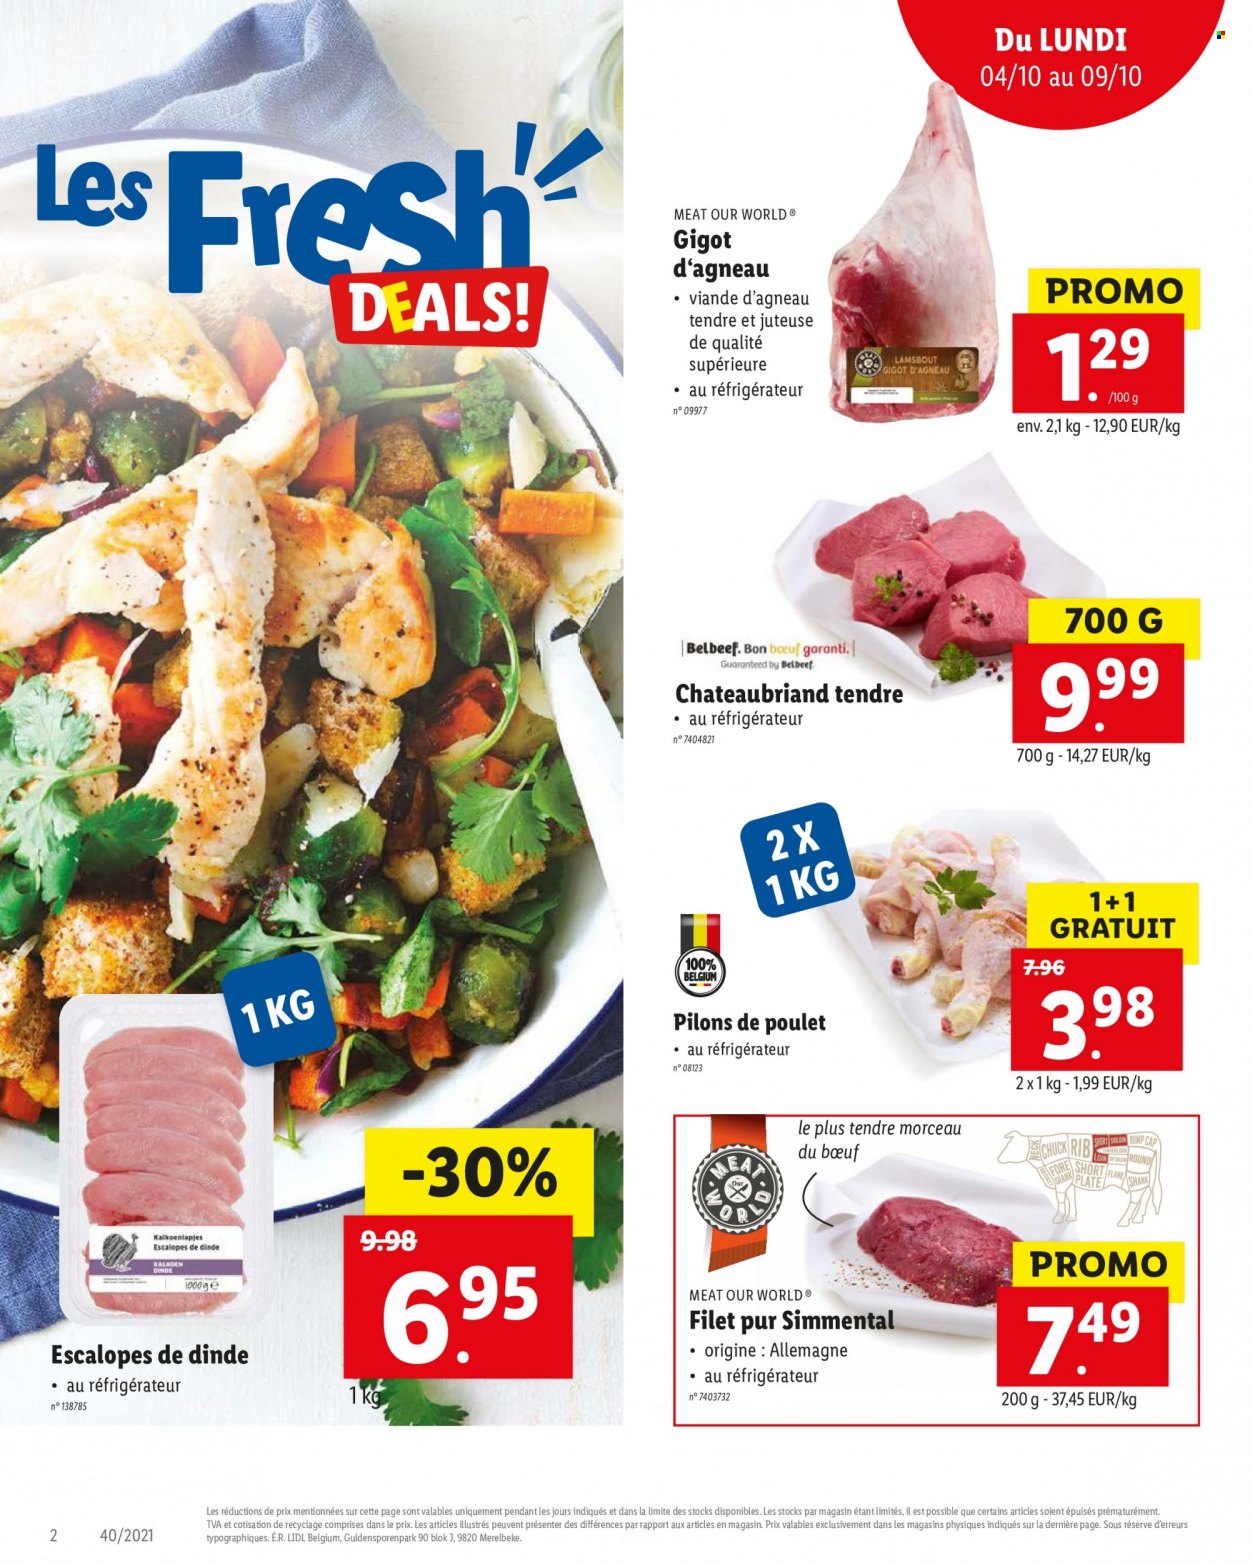 Catalogue Lidl - 4.10.2021 - 9.10.2021. Page 2.